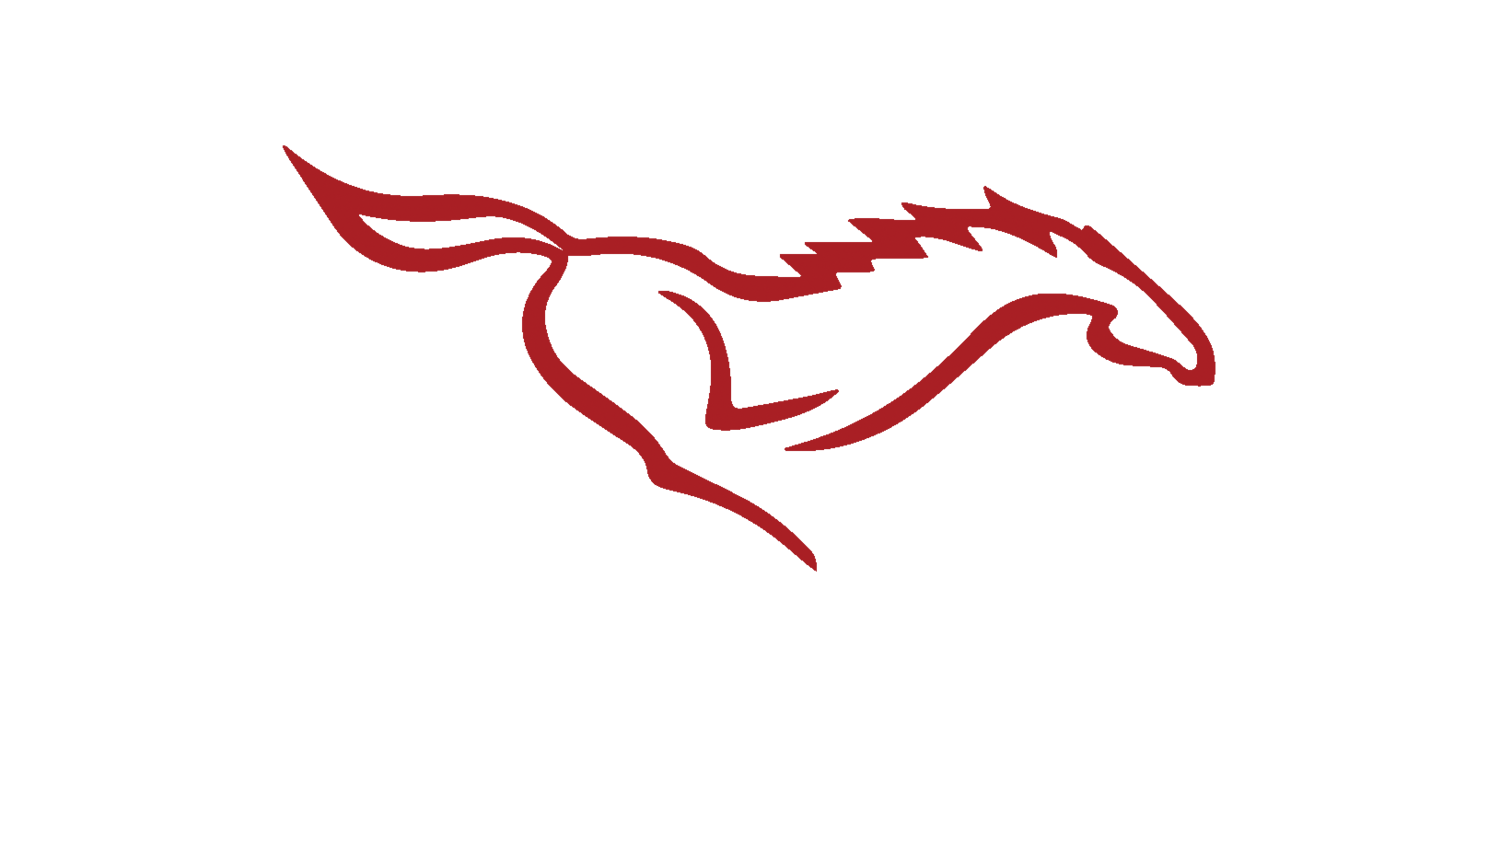 Duotem Capital Limited